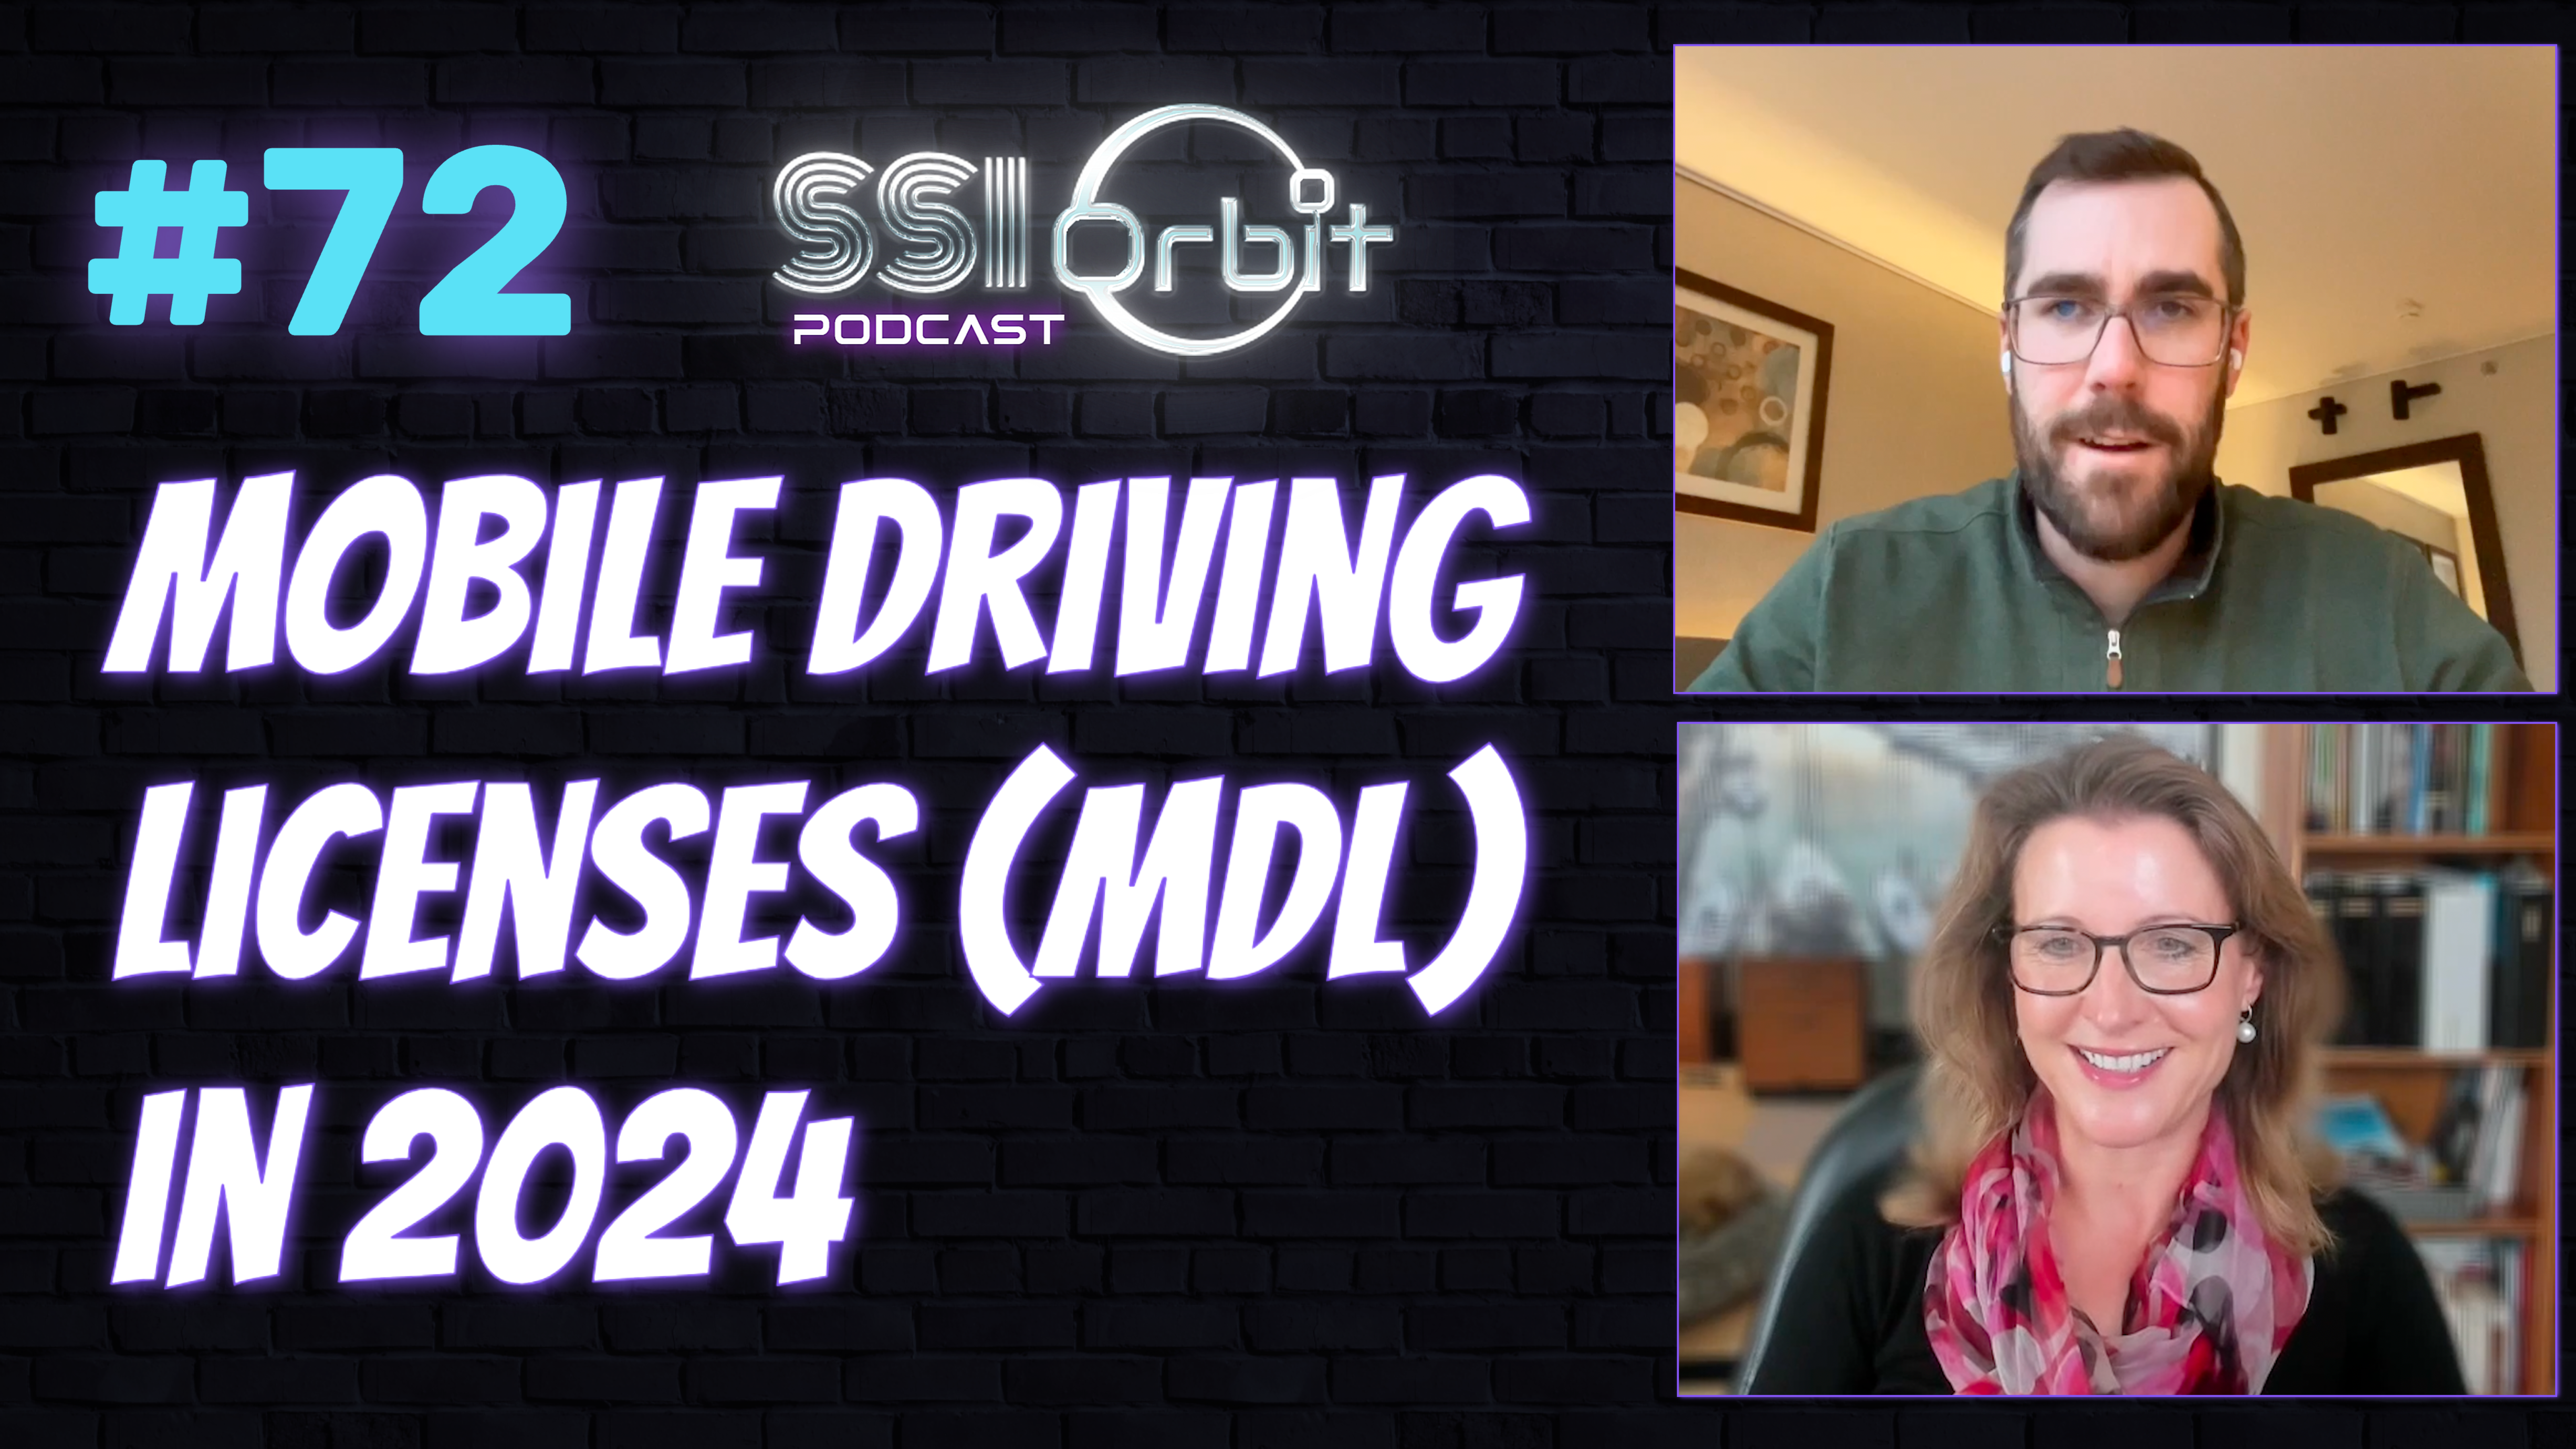 Mobile Driving Licenses (mDL) in 2024 (with Sylvia Arndt)